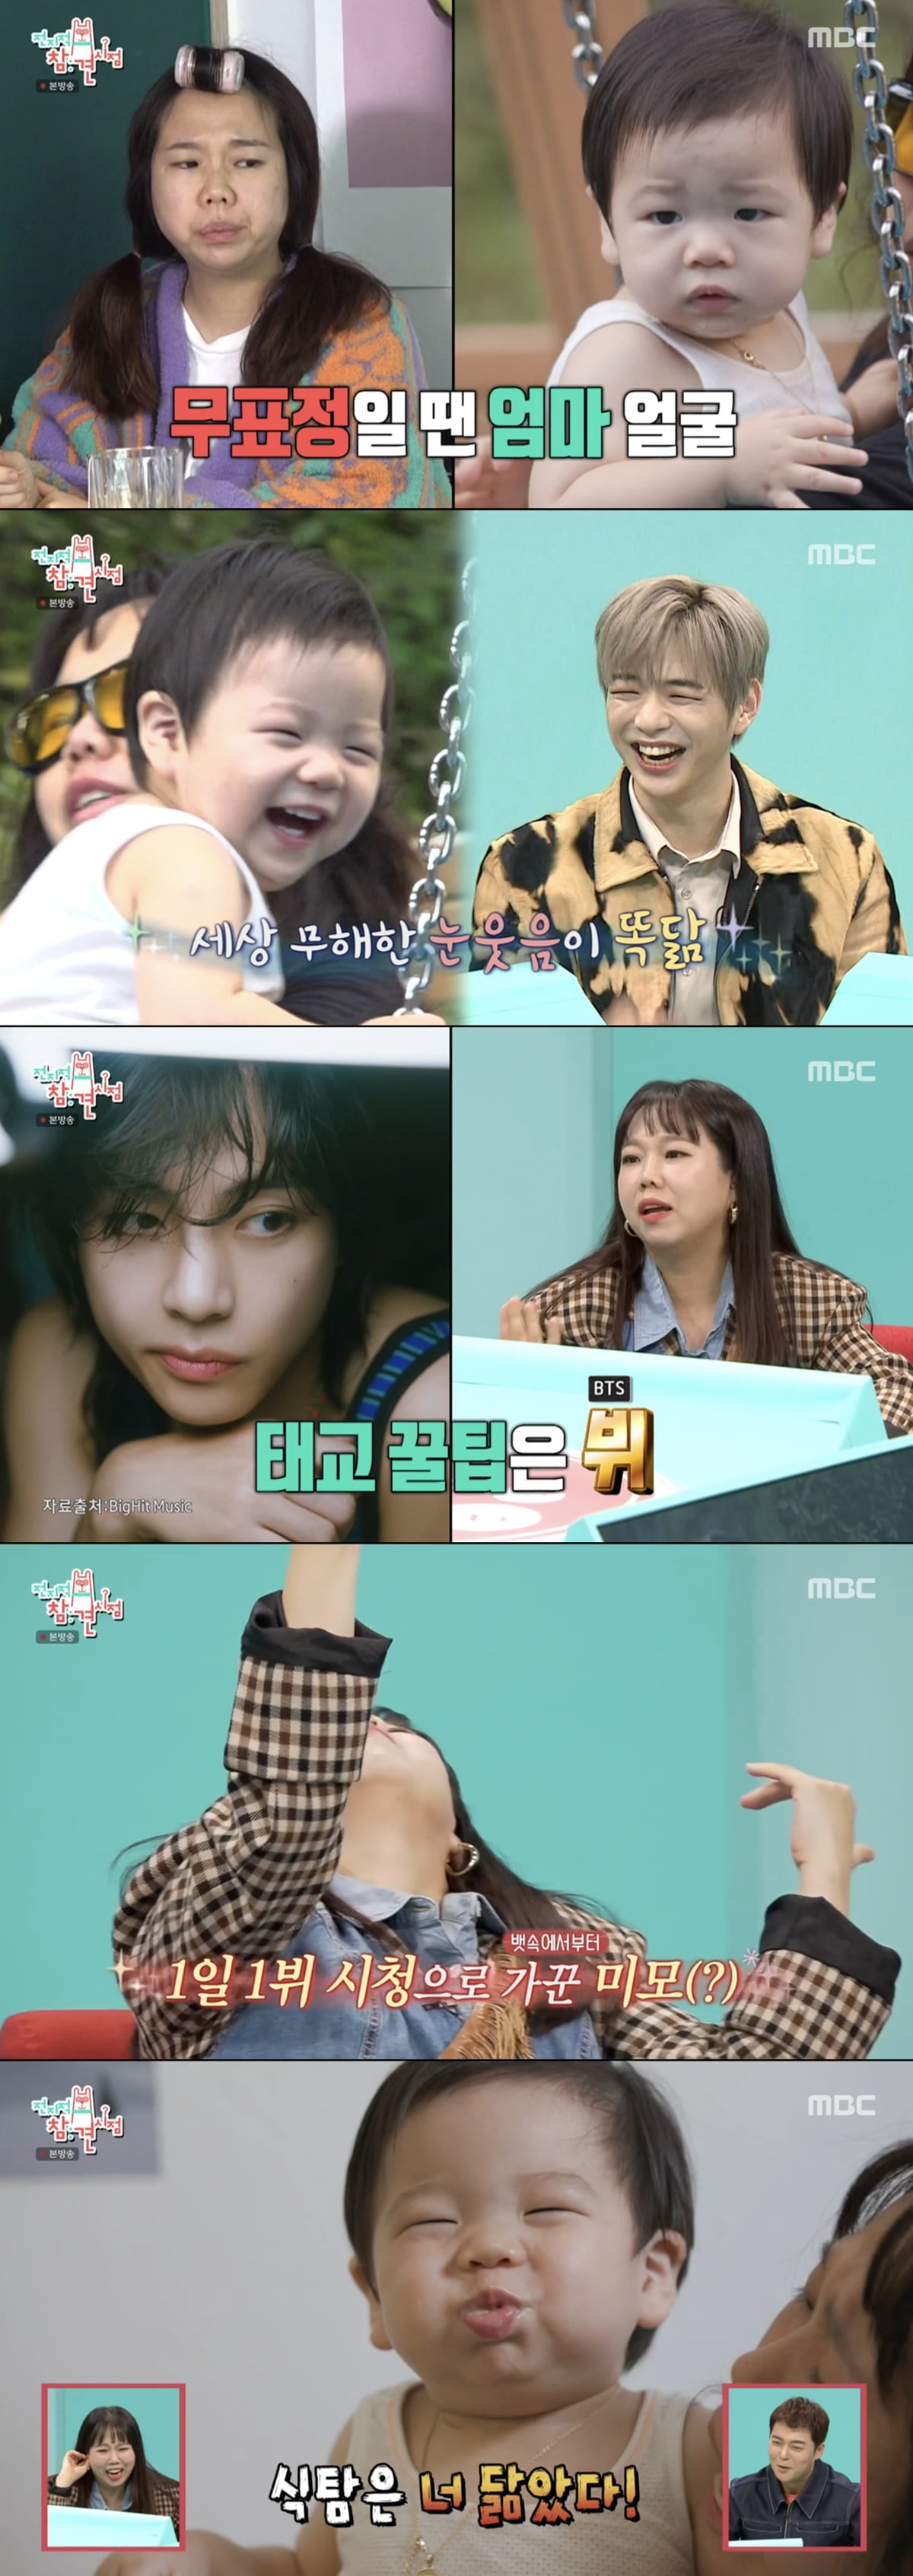 Hong Hyun-hee "I look at pictures of BTS V every day through prenatal education"